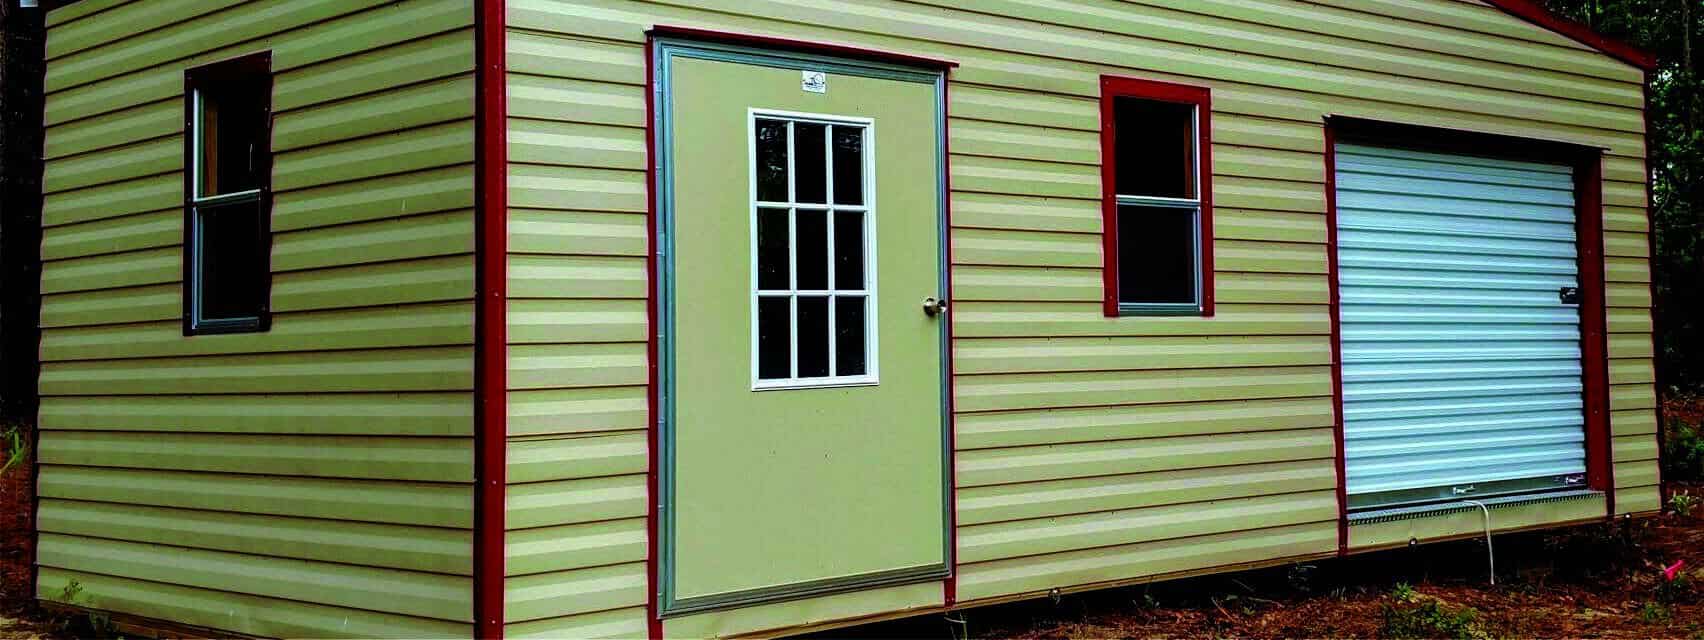 Robin sheds Probuilt Structures Sheds For Sale In Central Florida Red And Tan Americana